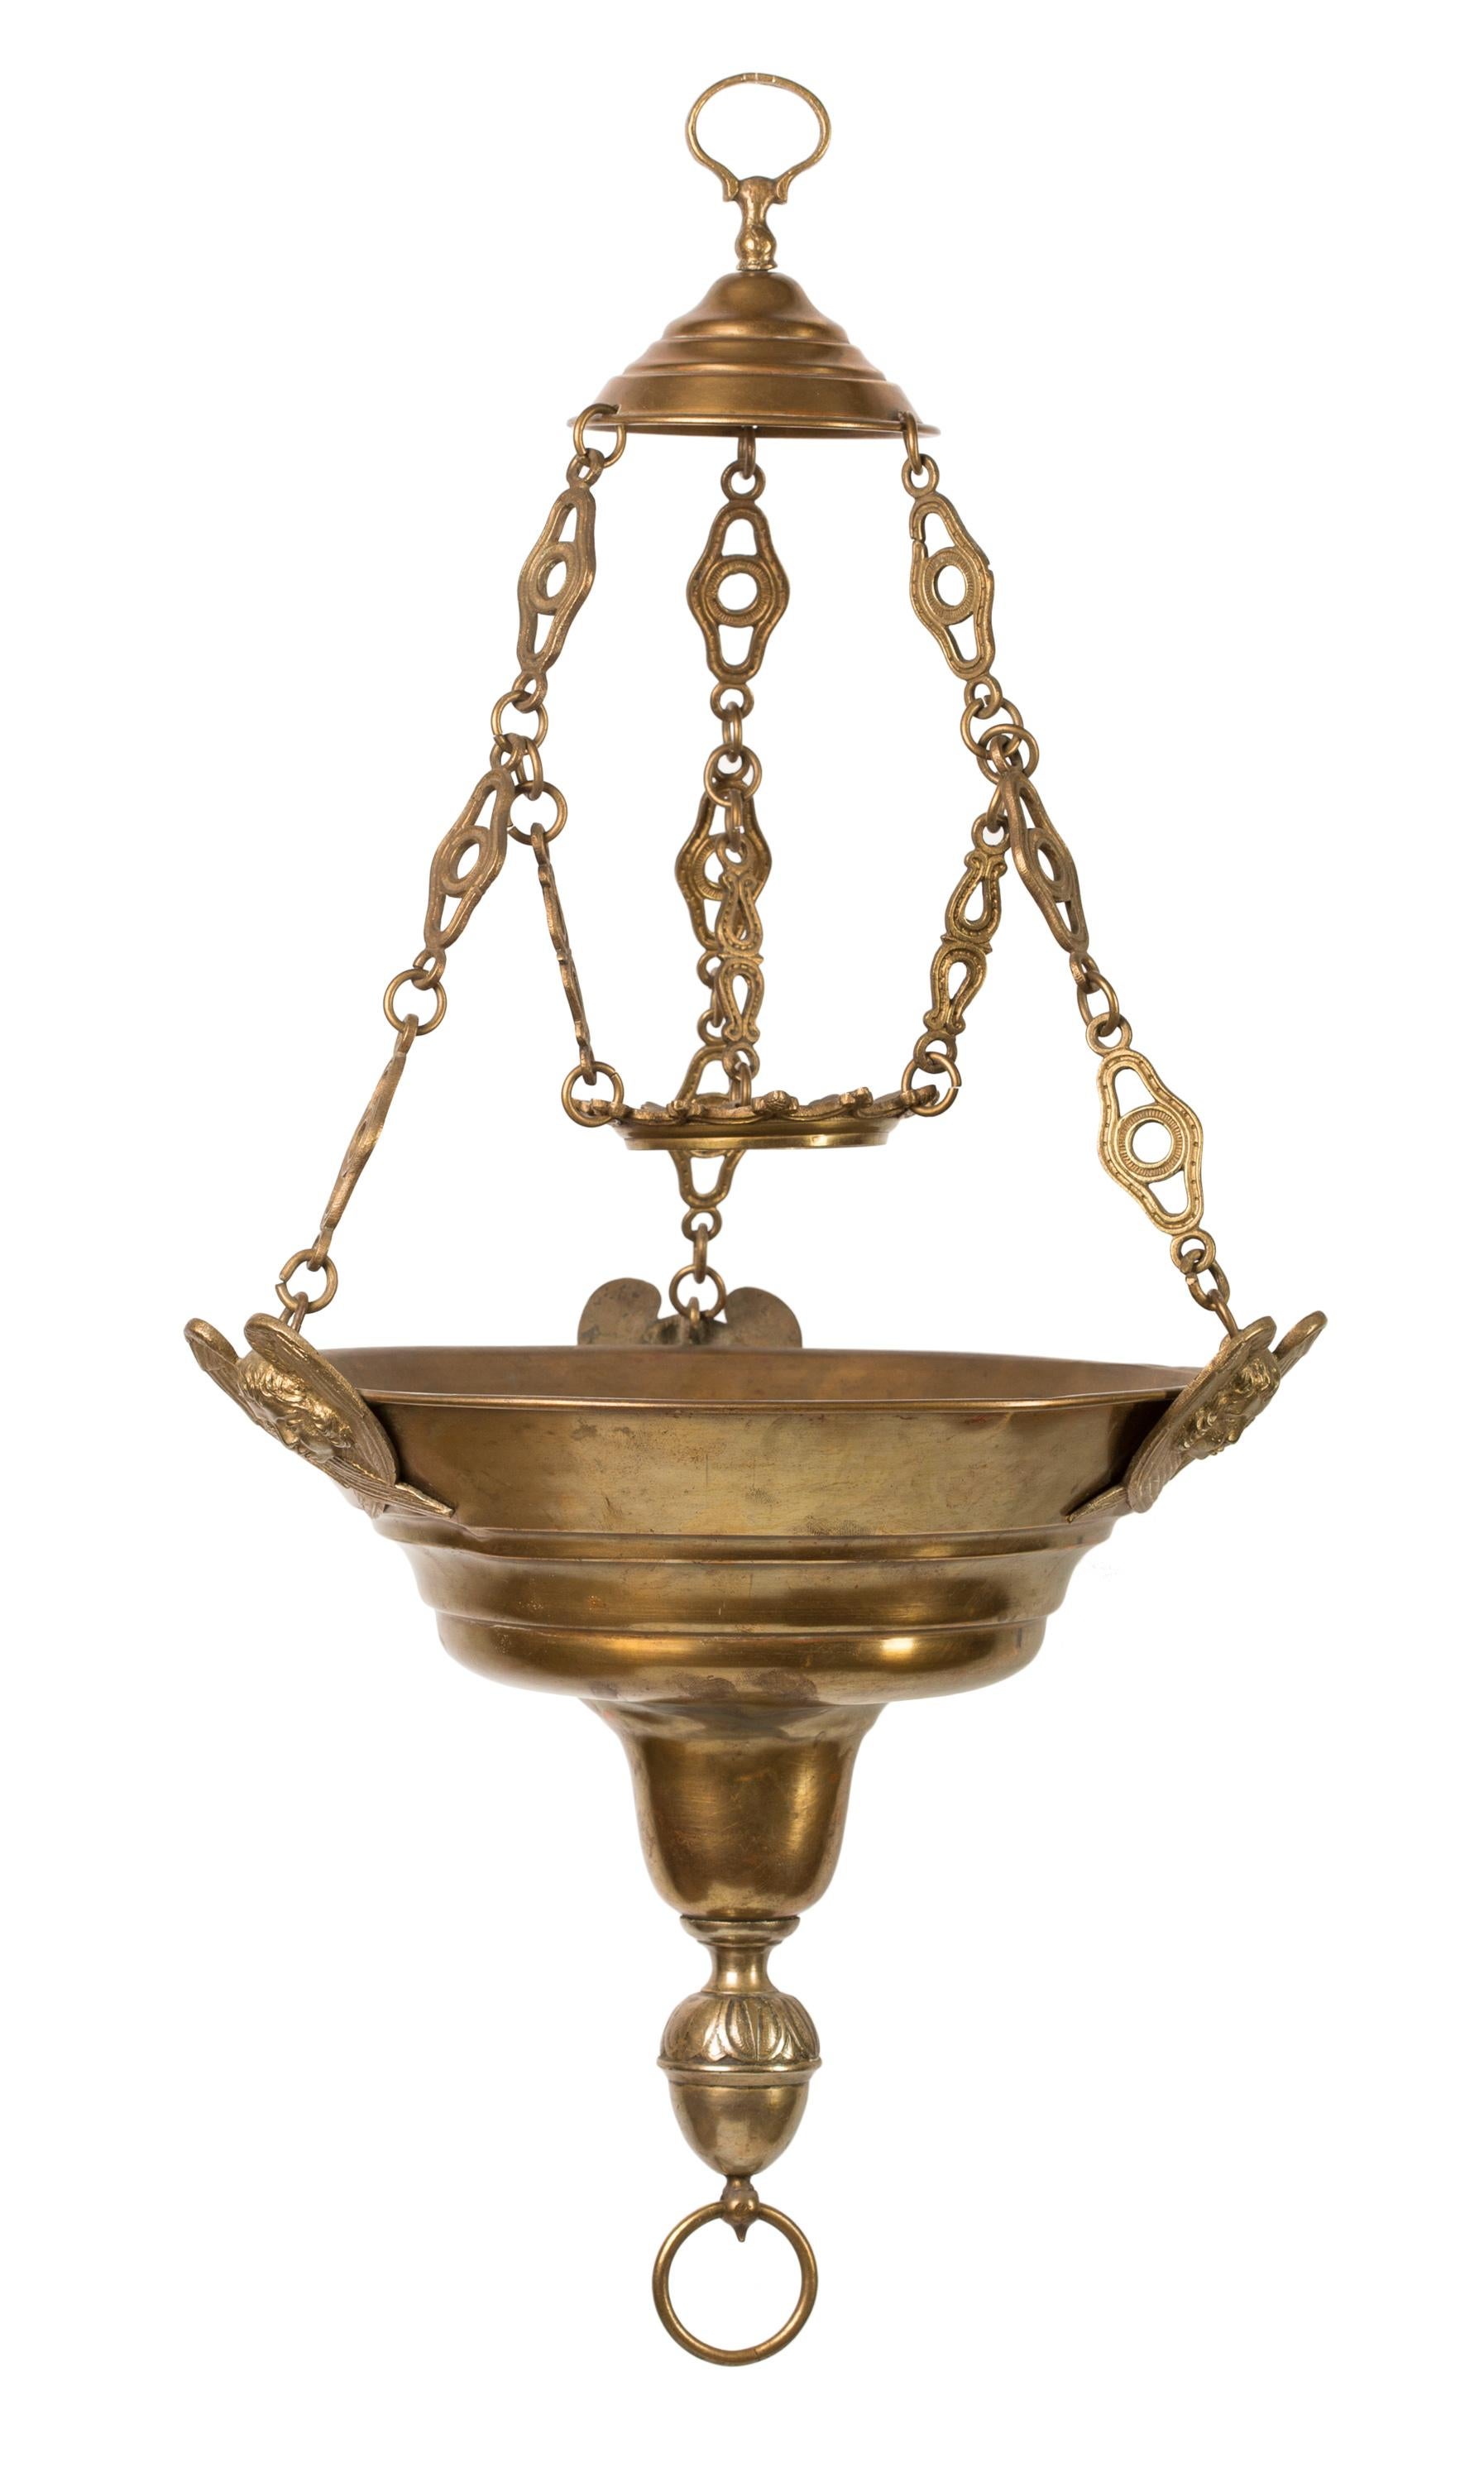 This 19th century brass hanging pendant sanctuary lamp is from a Spanish collection, but it shares characteristics with French sanctuary lamps of the same period. The overall shape is reminiscent of the suspended oil lamps of ancient times, and